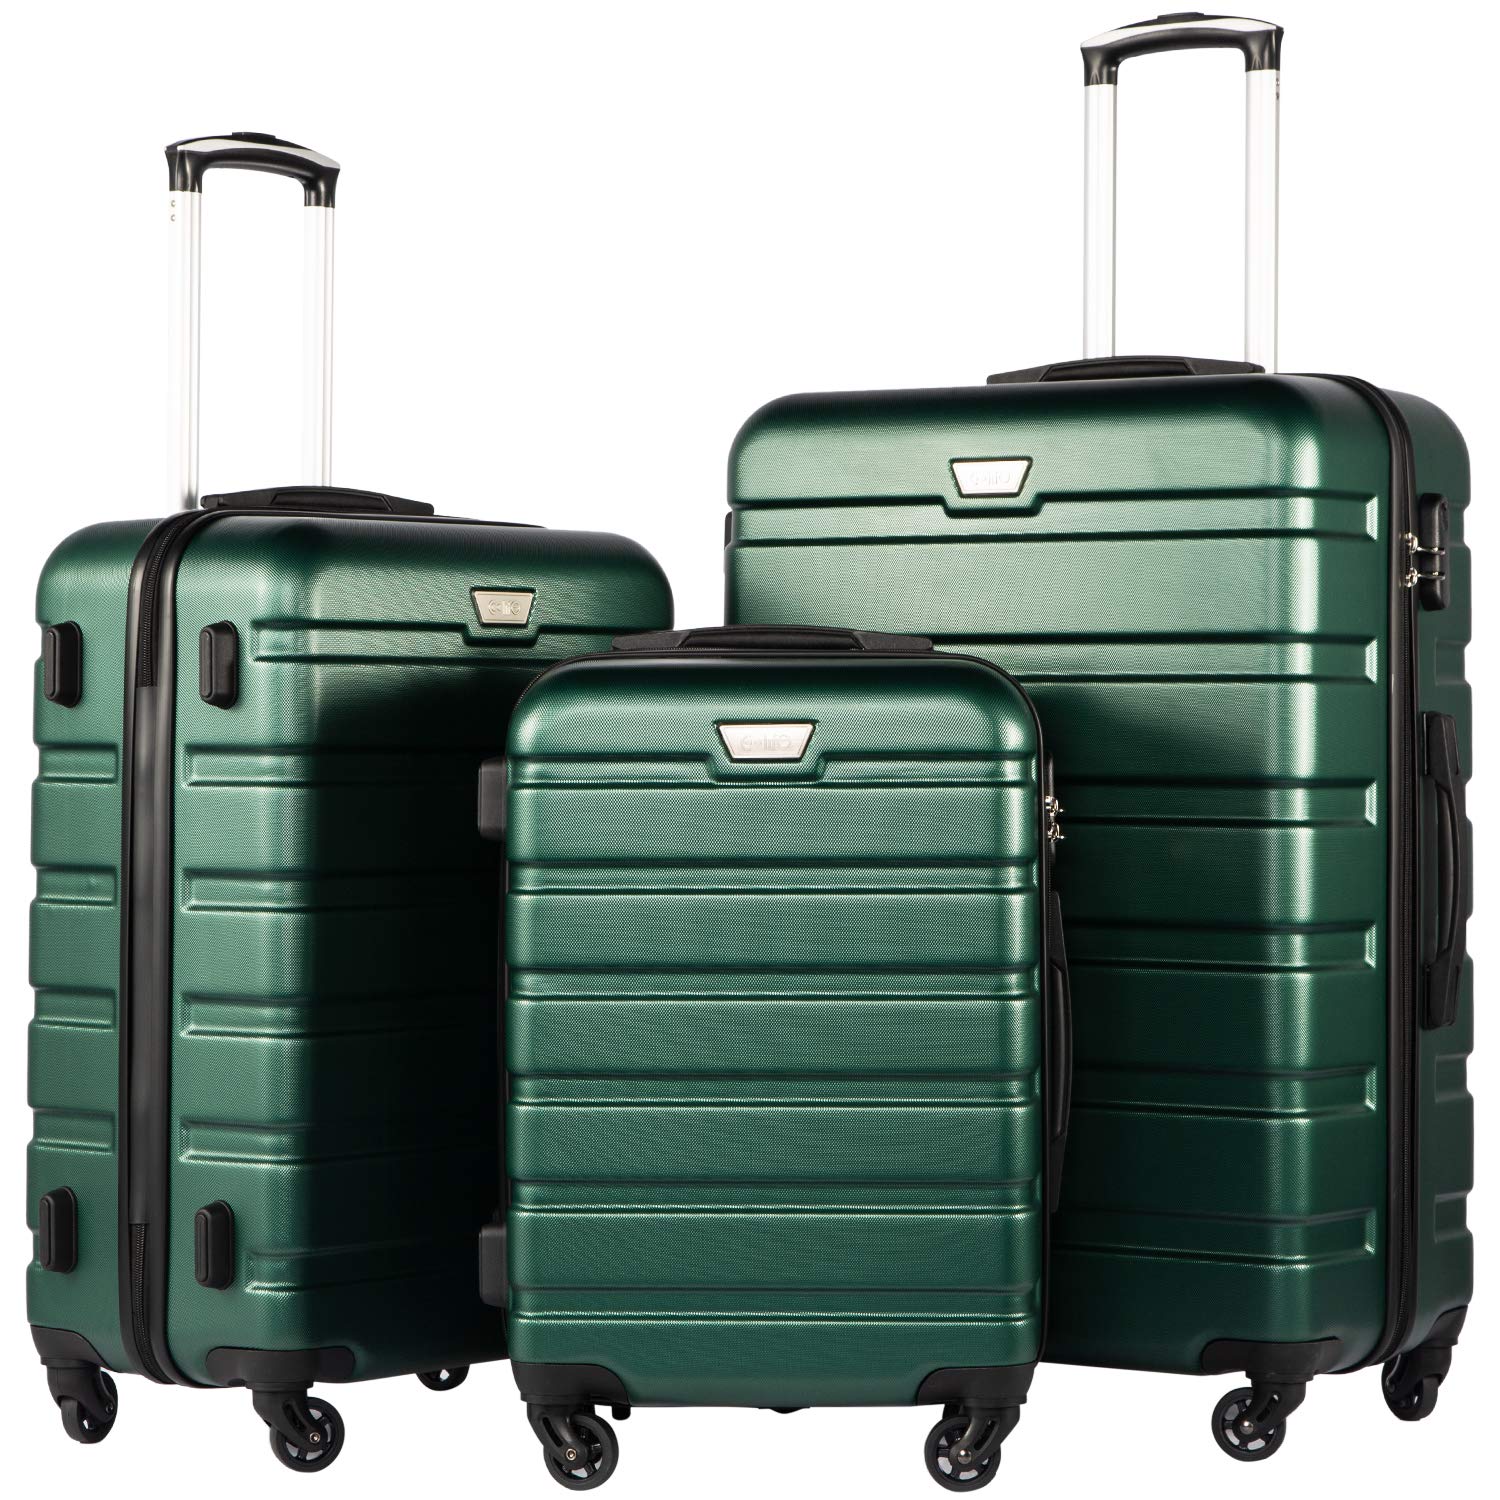 iFLY Hardside Fibertech Carry-on Luggage, 20, Forest Green 